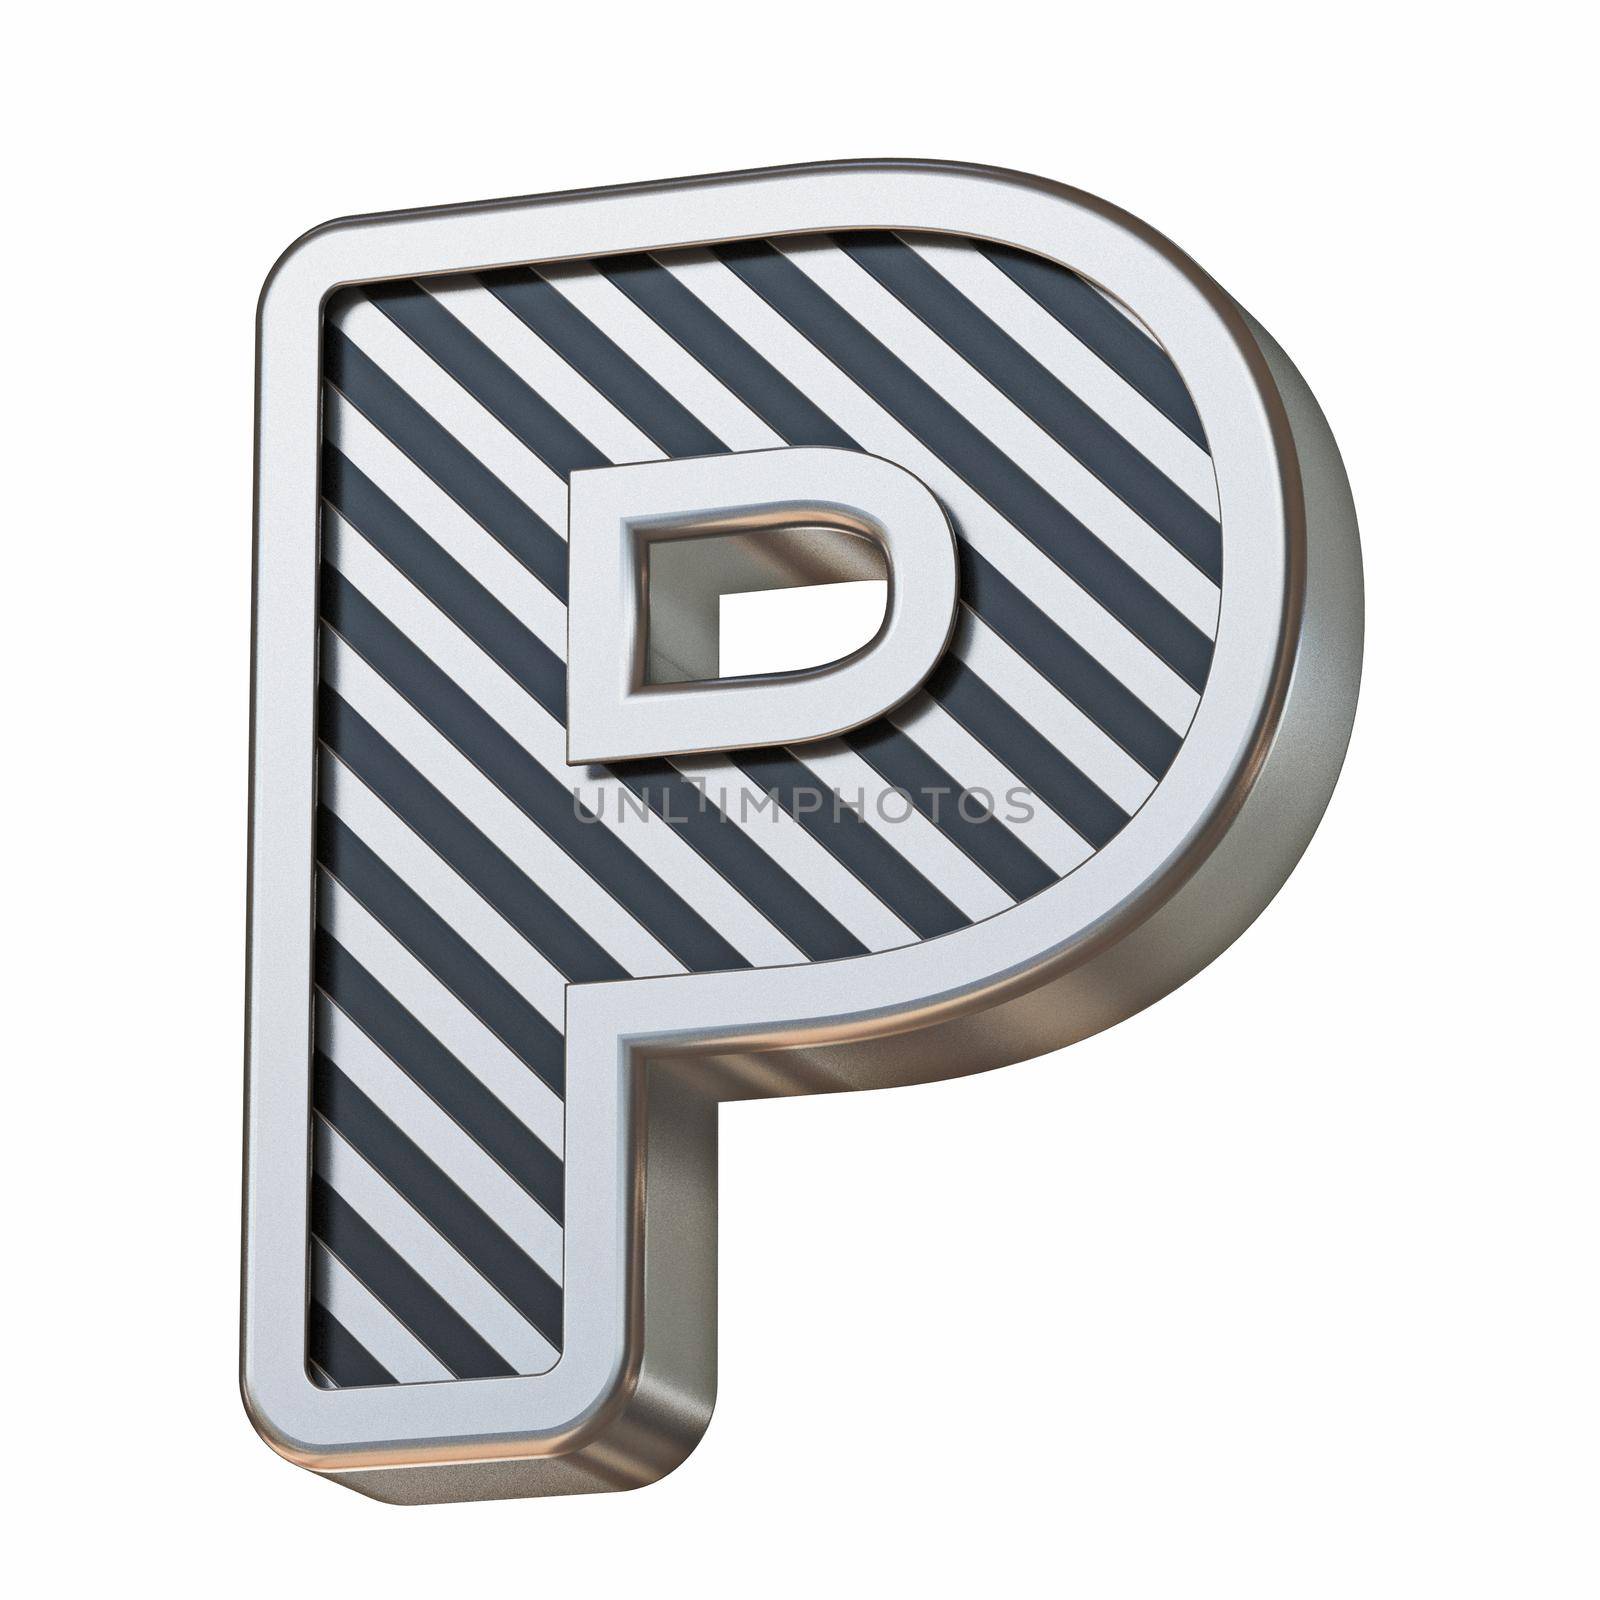 Stainless steel and black stripes font Letter P 3D by djmilic